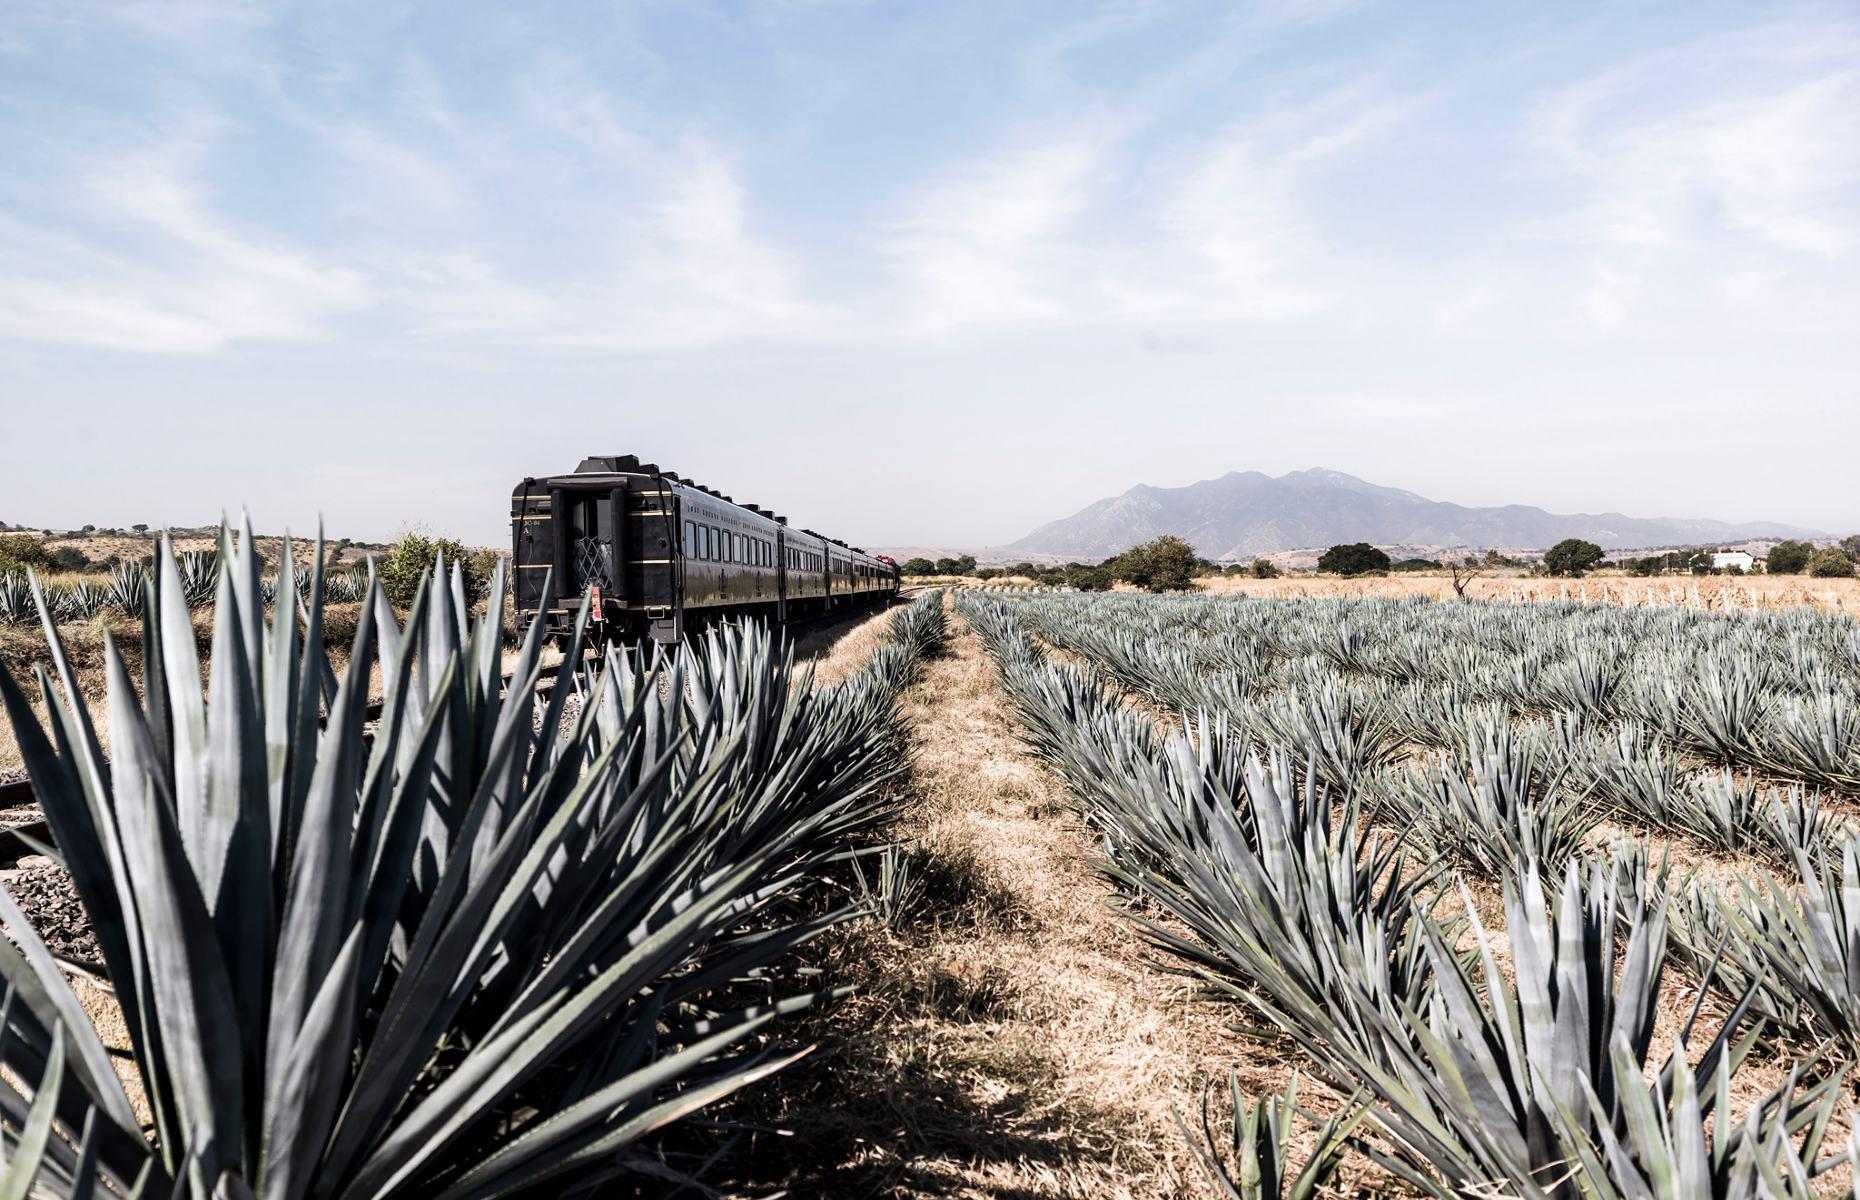 Whether it’s beautiful landscapes, high-end luxury or novelty value you’re after, North America has every train trip you could want and more. From famous routes like the California Zephyr and the Canadian to lesser-known gems such as the Sky Railway, plus new routes like the Ethan Allen Express, here’s our pick of the best rail journeys in the USA, Mexico and Canada.